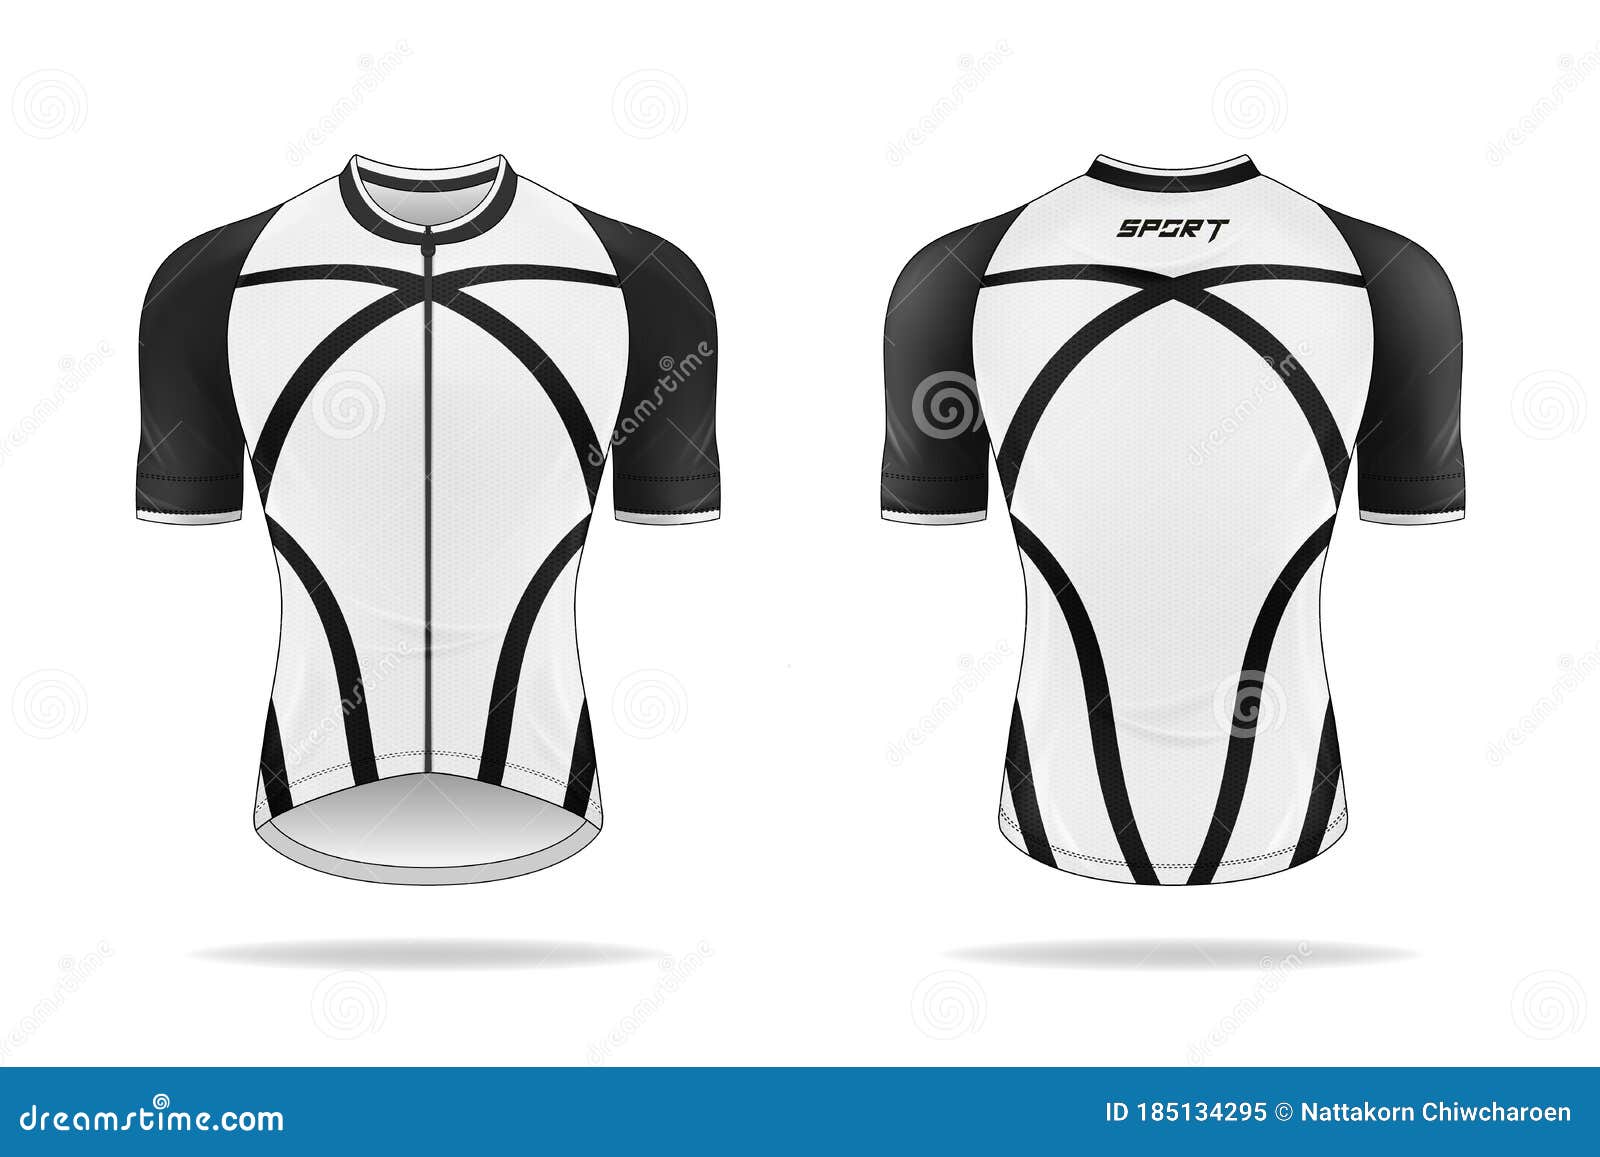 Download Specification Cycling Jersey Template Stock Vector Illustration Of Clothes Back 185134295 Free Mockups